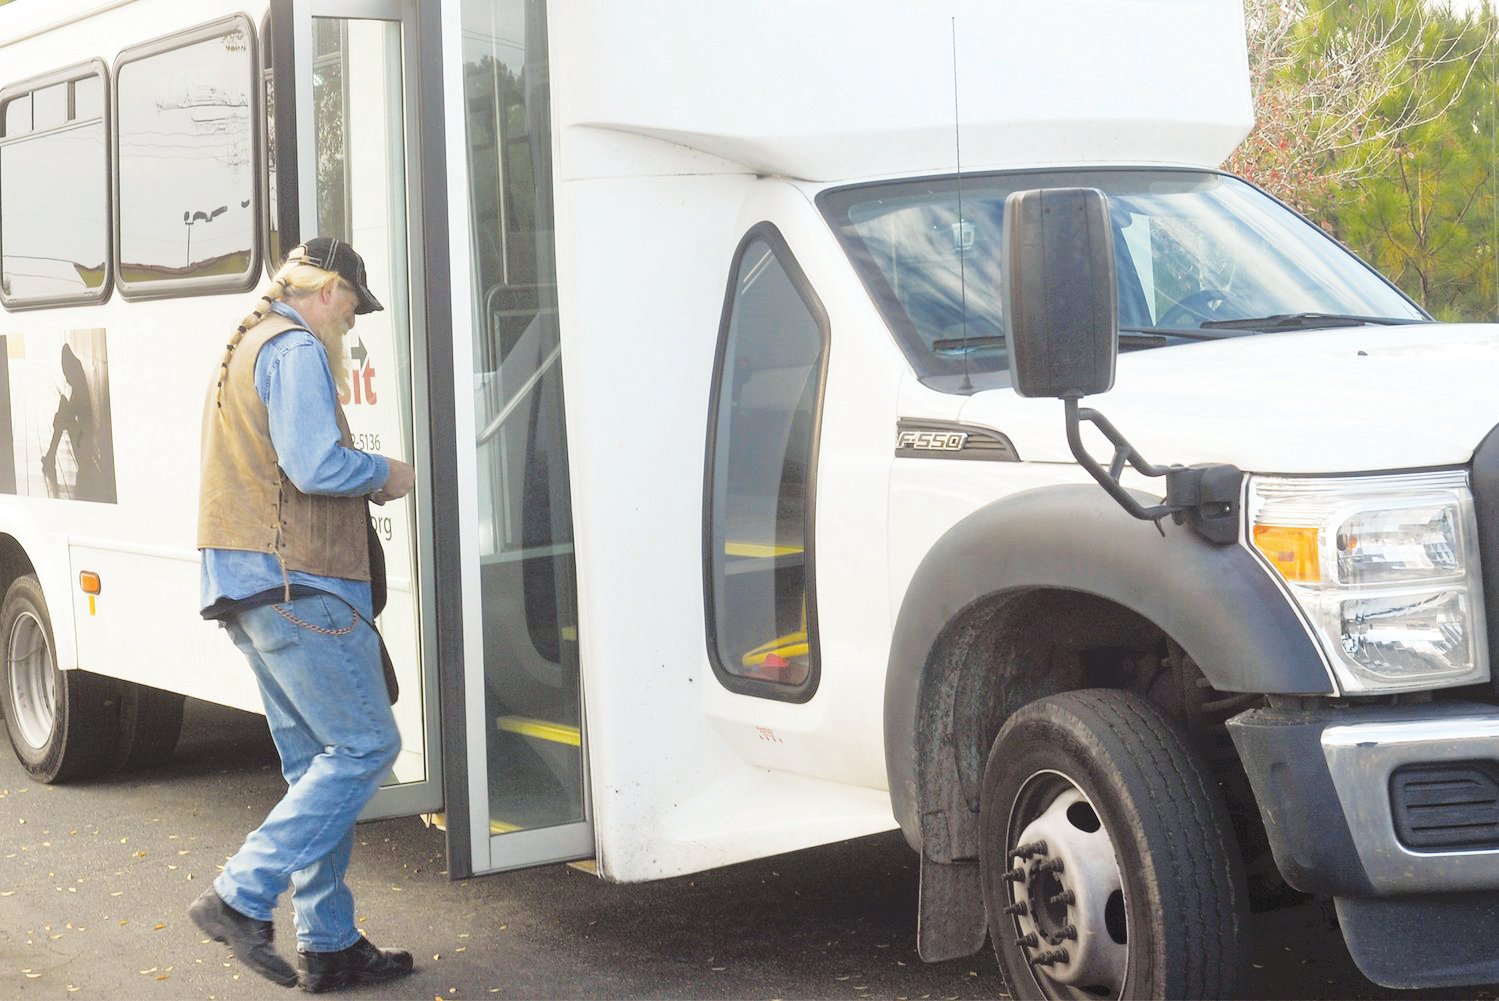 Robert Gullie boards a Chatham Transit bus at Lowe’s Home Improvement in Pittsboro. Gullie, a construction worker, uses the service to get to work daily.